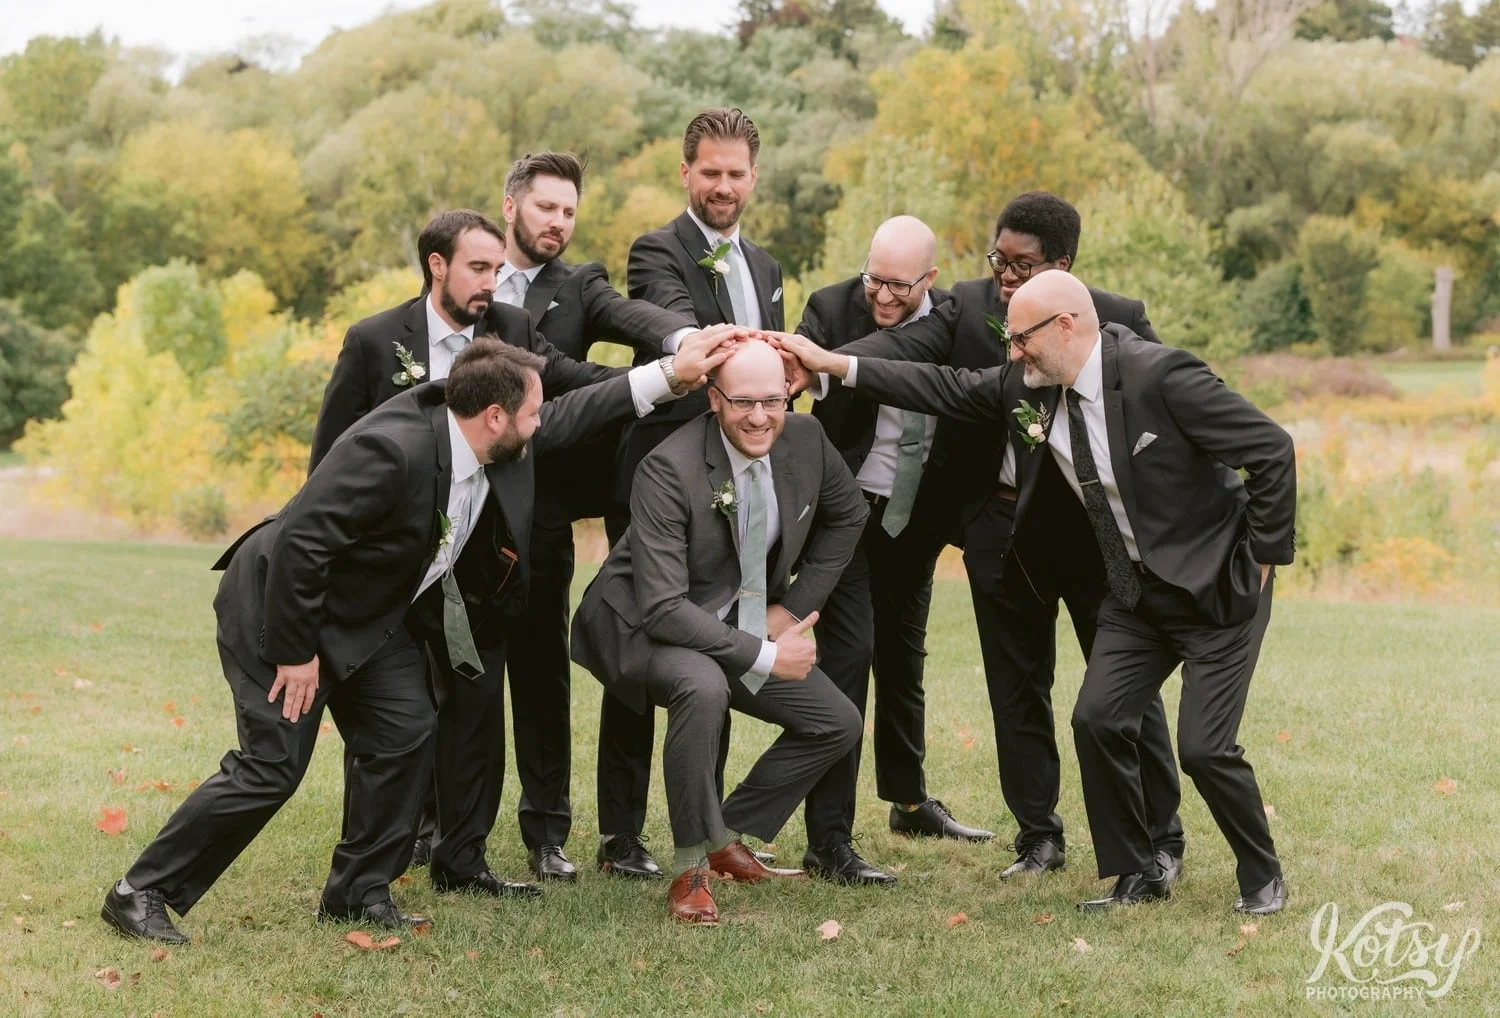 A groom wearing a green tie and gray suit squats as his seven groomsmen placed their hands on his head at West Deane Park in Toronto, Canada